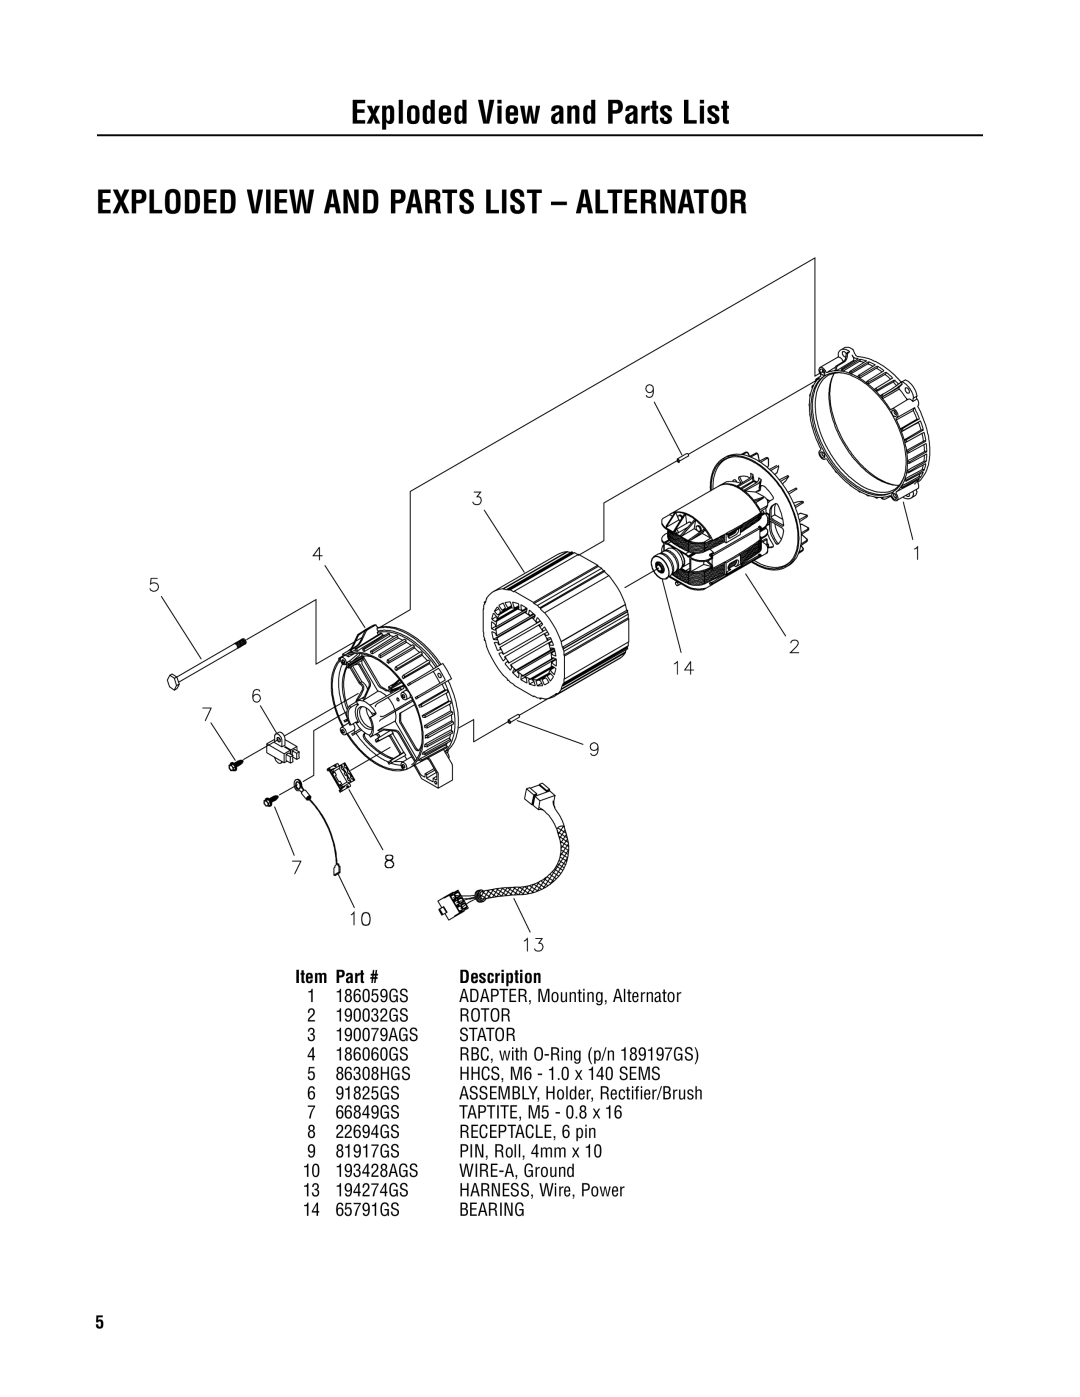 Husqvarna 1055 GN manual Exploded View And Parts List - Alternator, Exploded View and Parts List, Description 